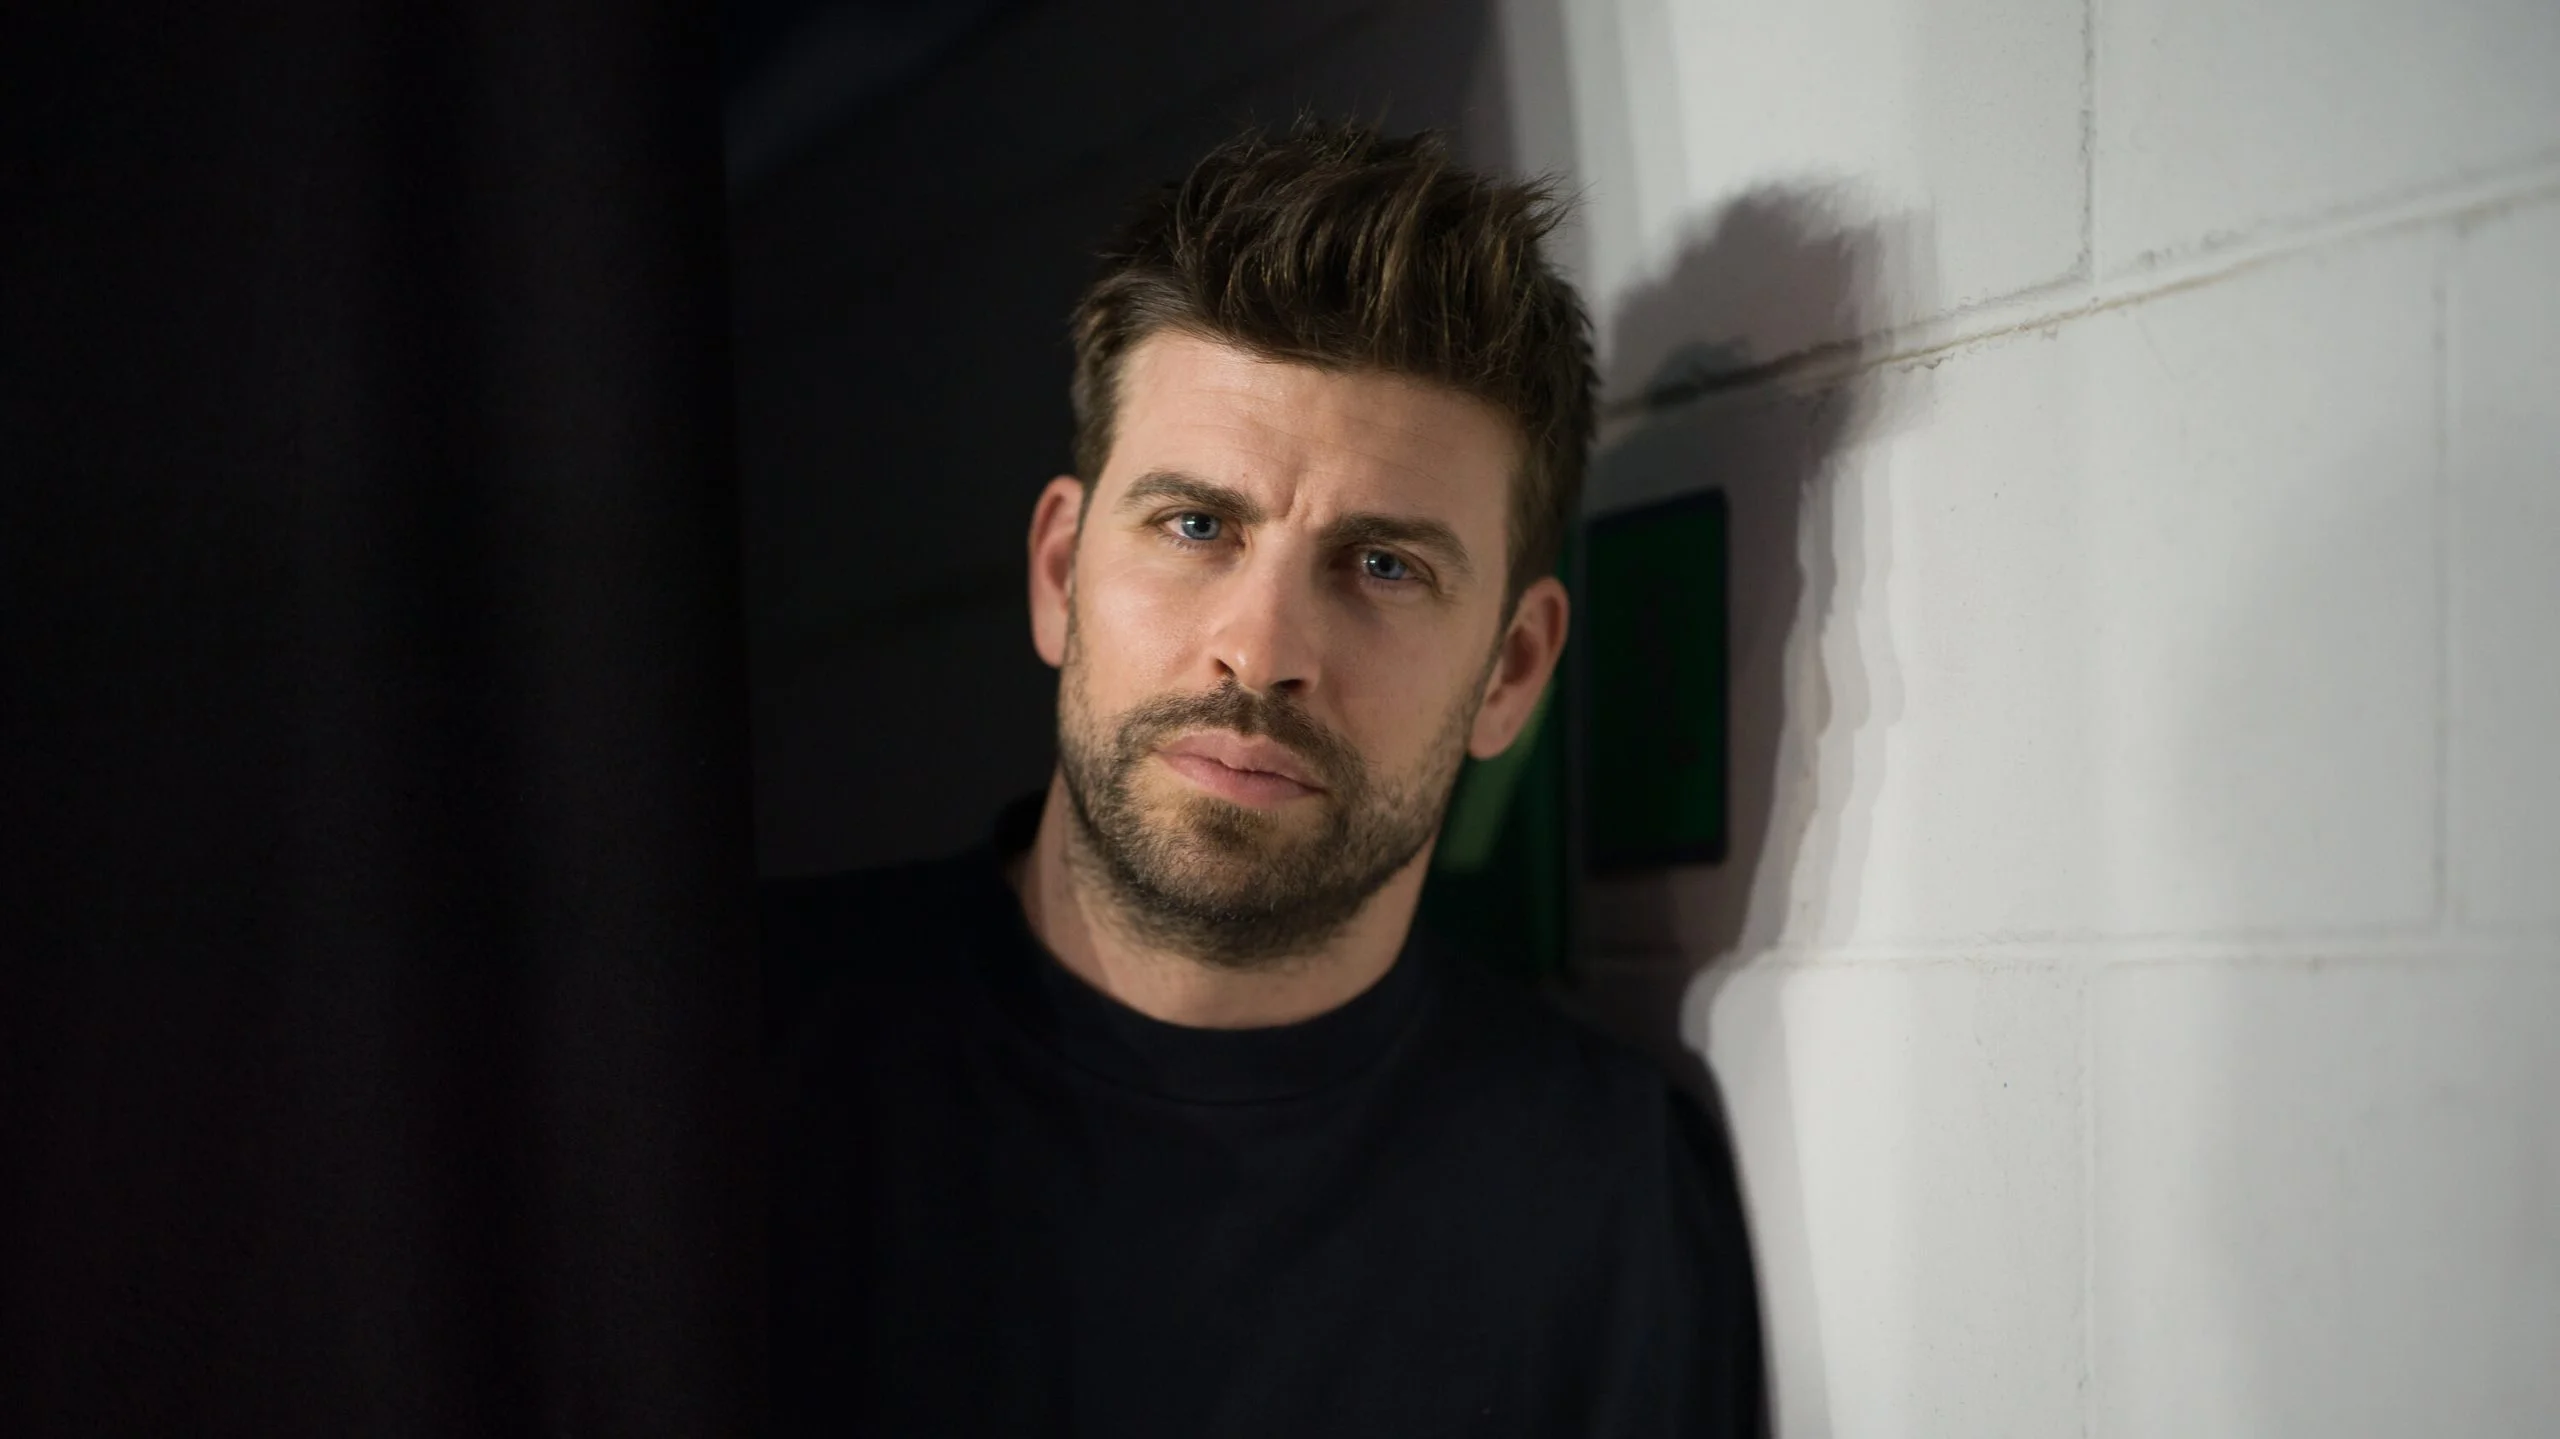 Pique credits Barcelona for continuing career past 30